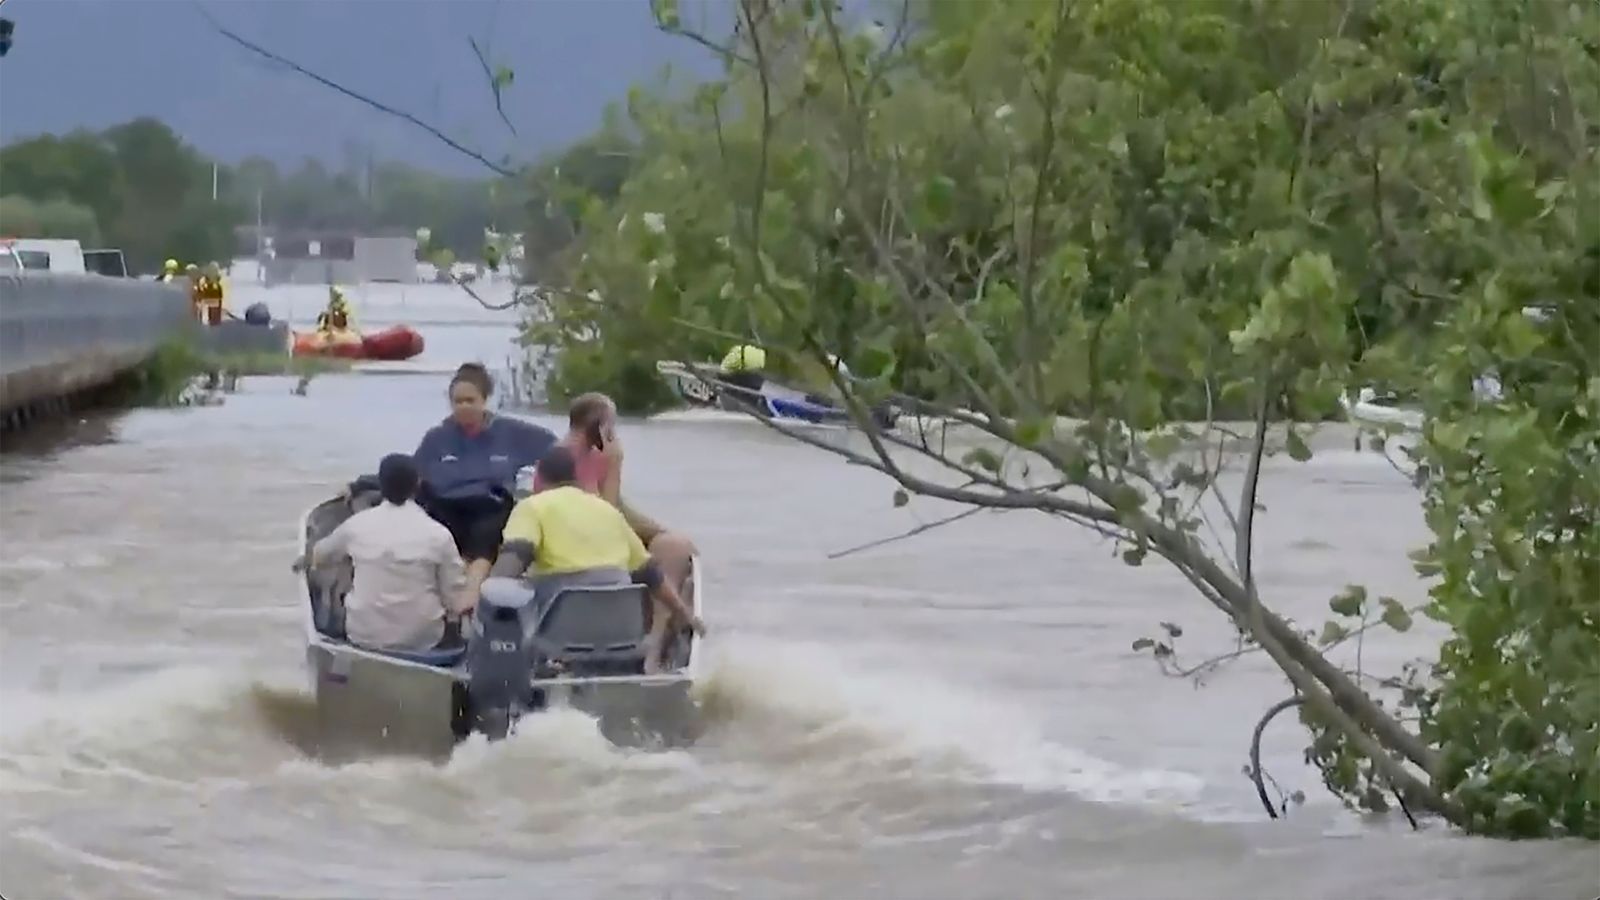 Several countries across the world hit by extreme weather as floods